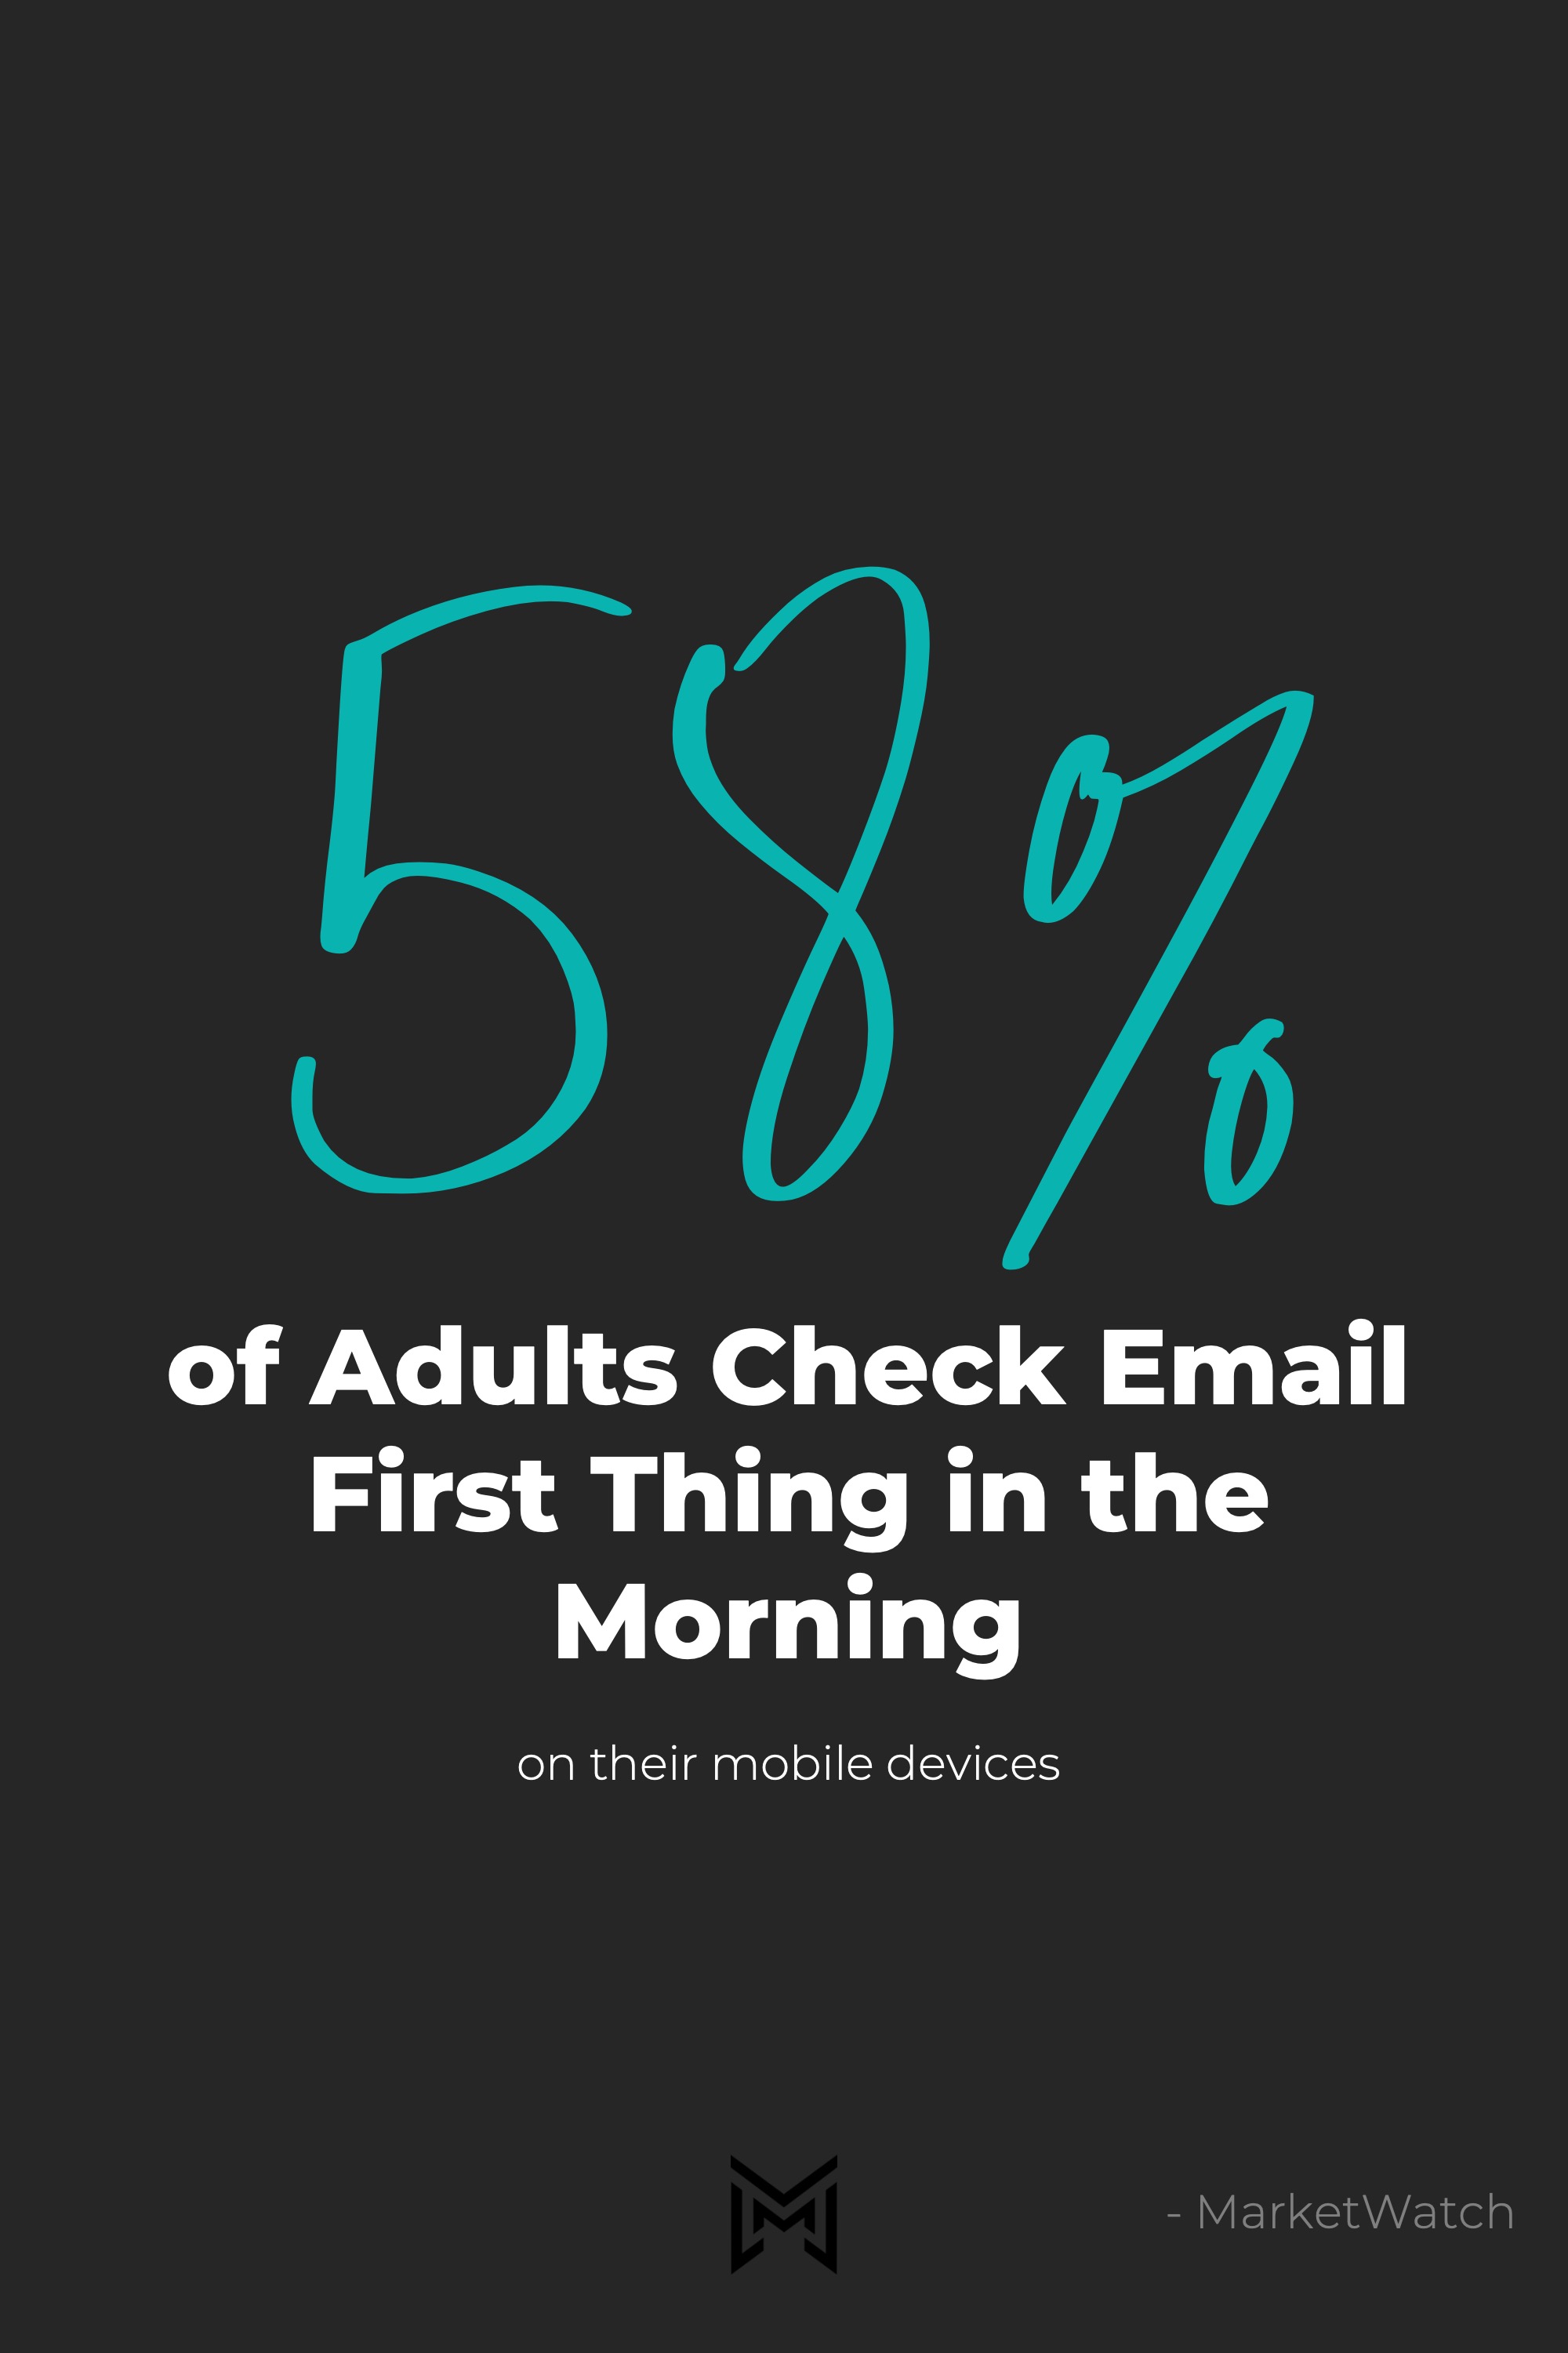 Marketing Stat - 58 % Open Emails First thing in the Morning